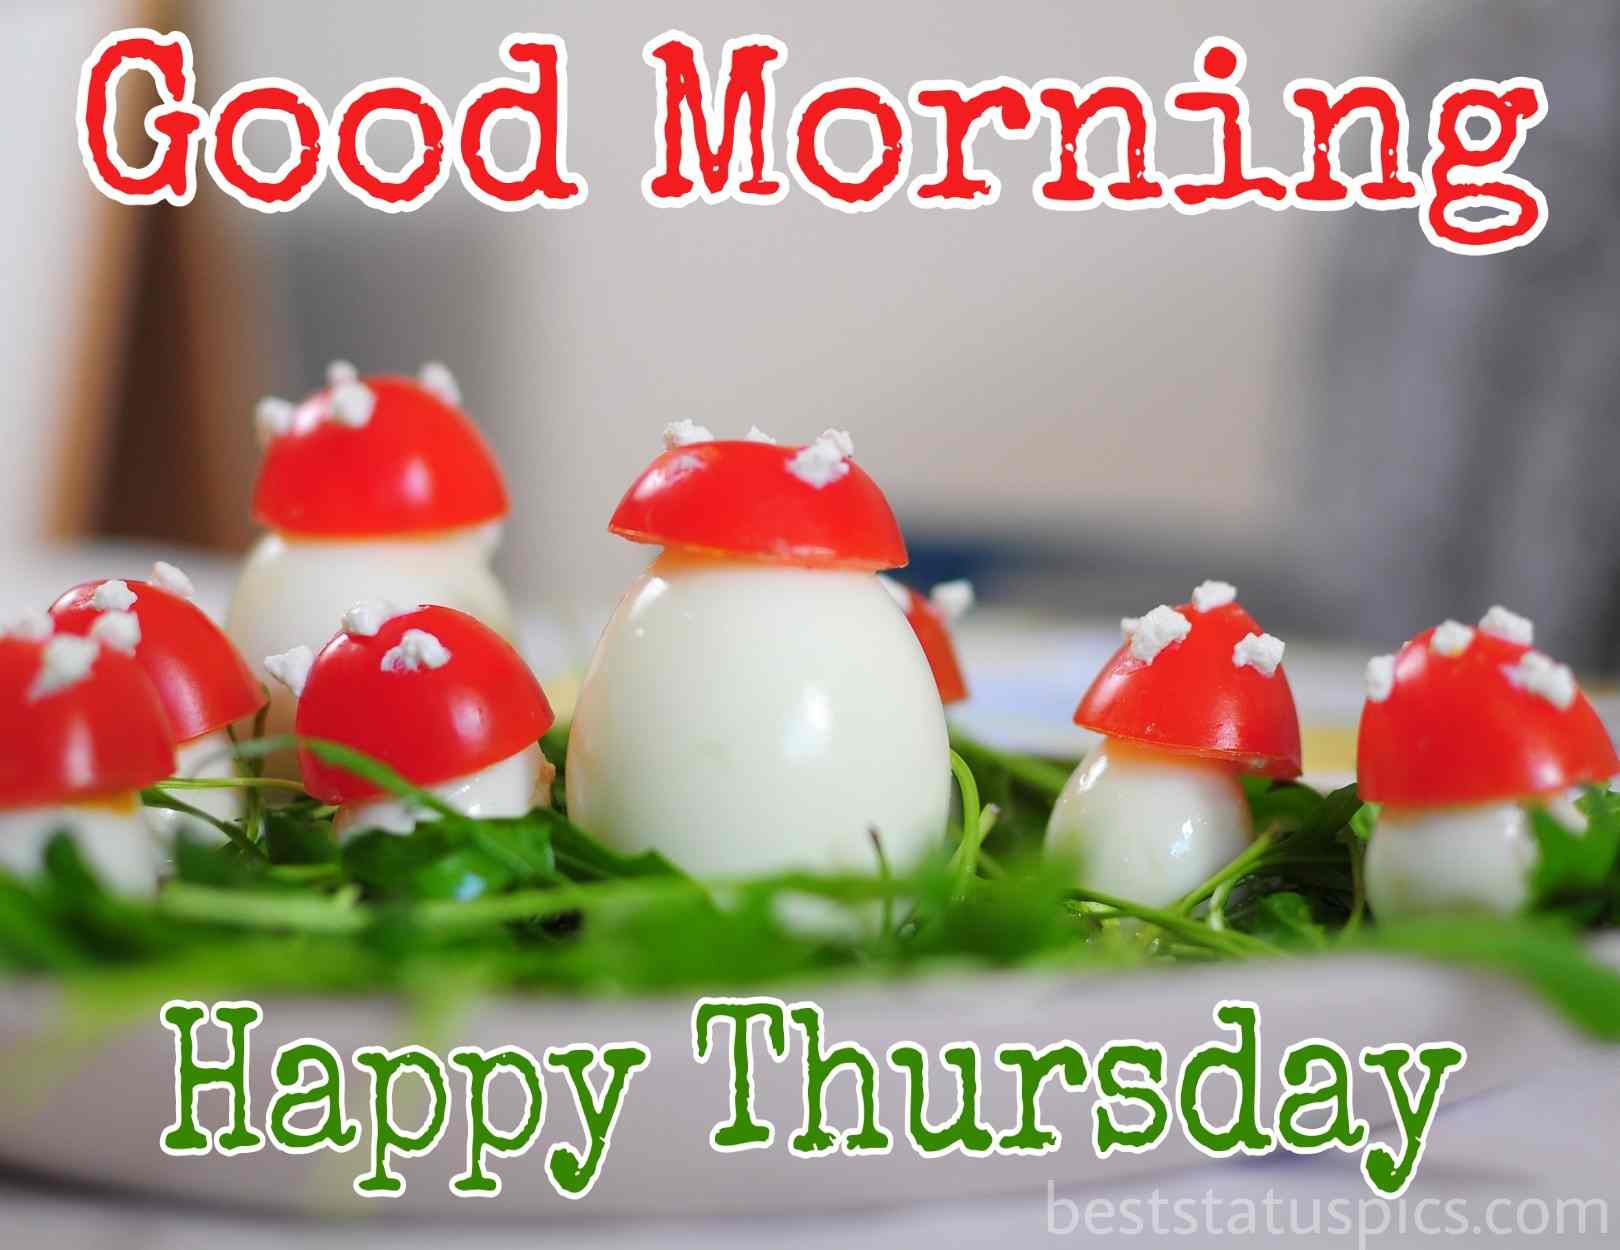 33+ Good Morning Happy Thursday Images, Wishes, Quotes Best Status Pics